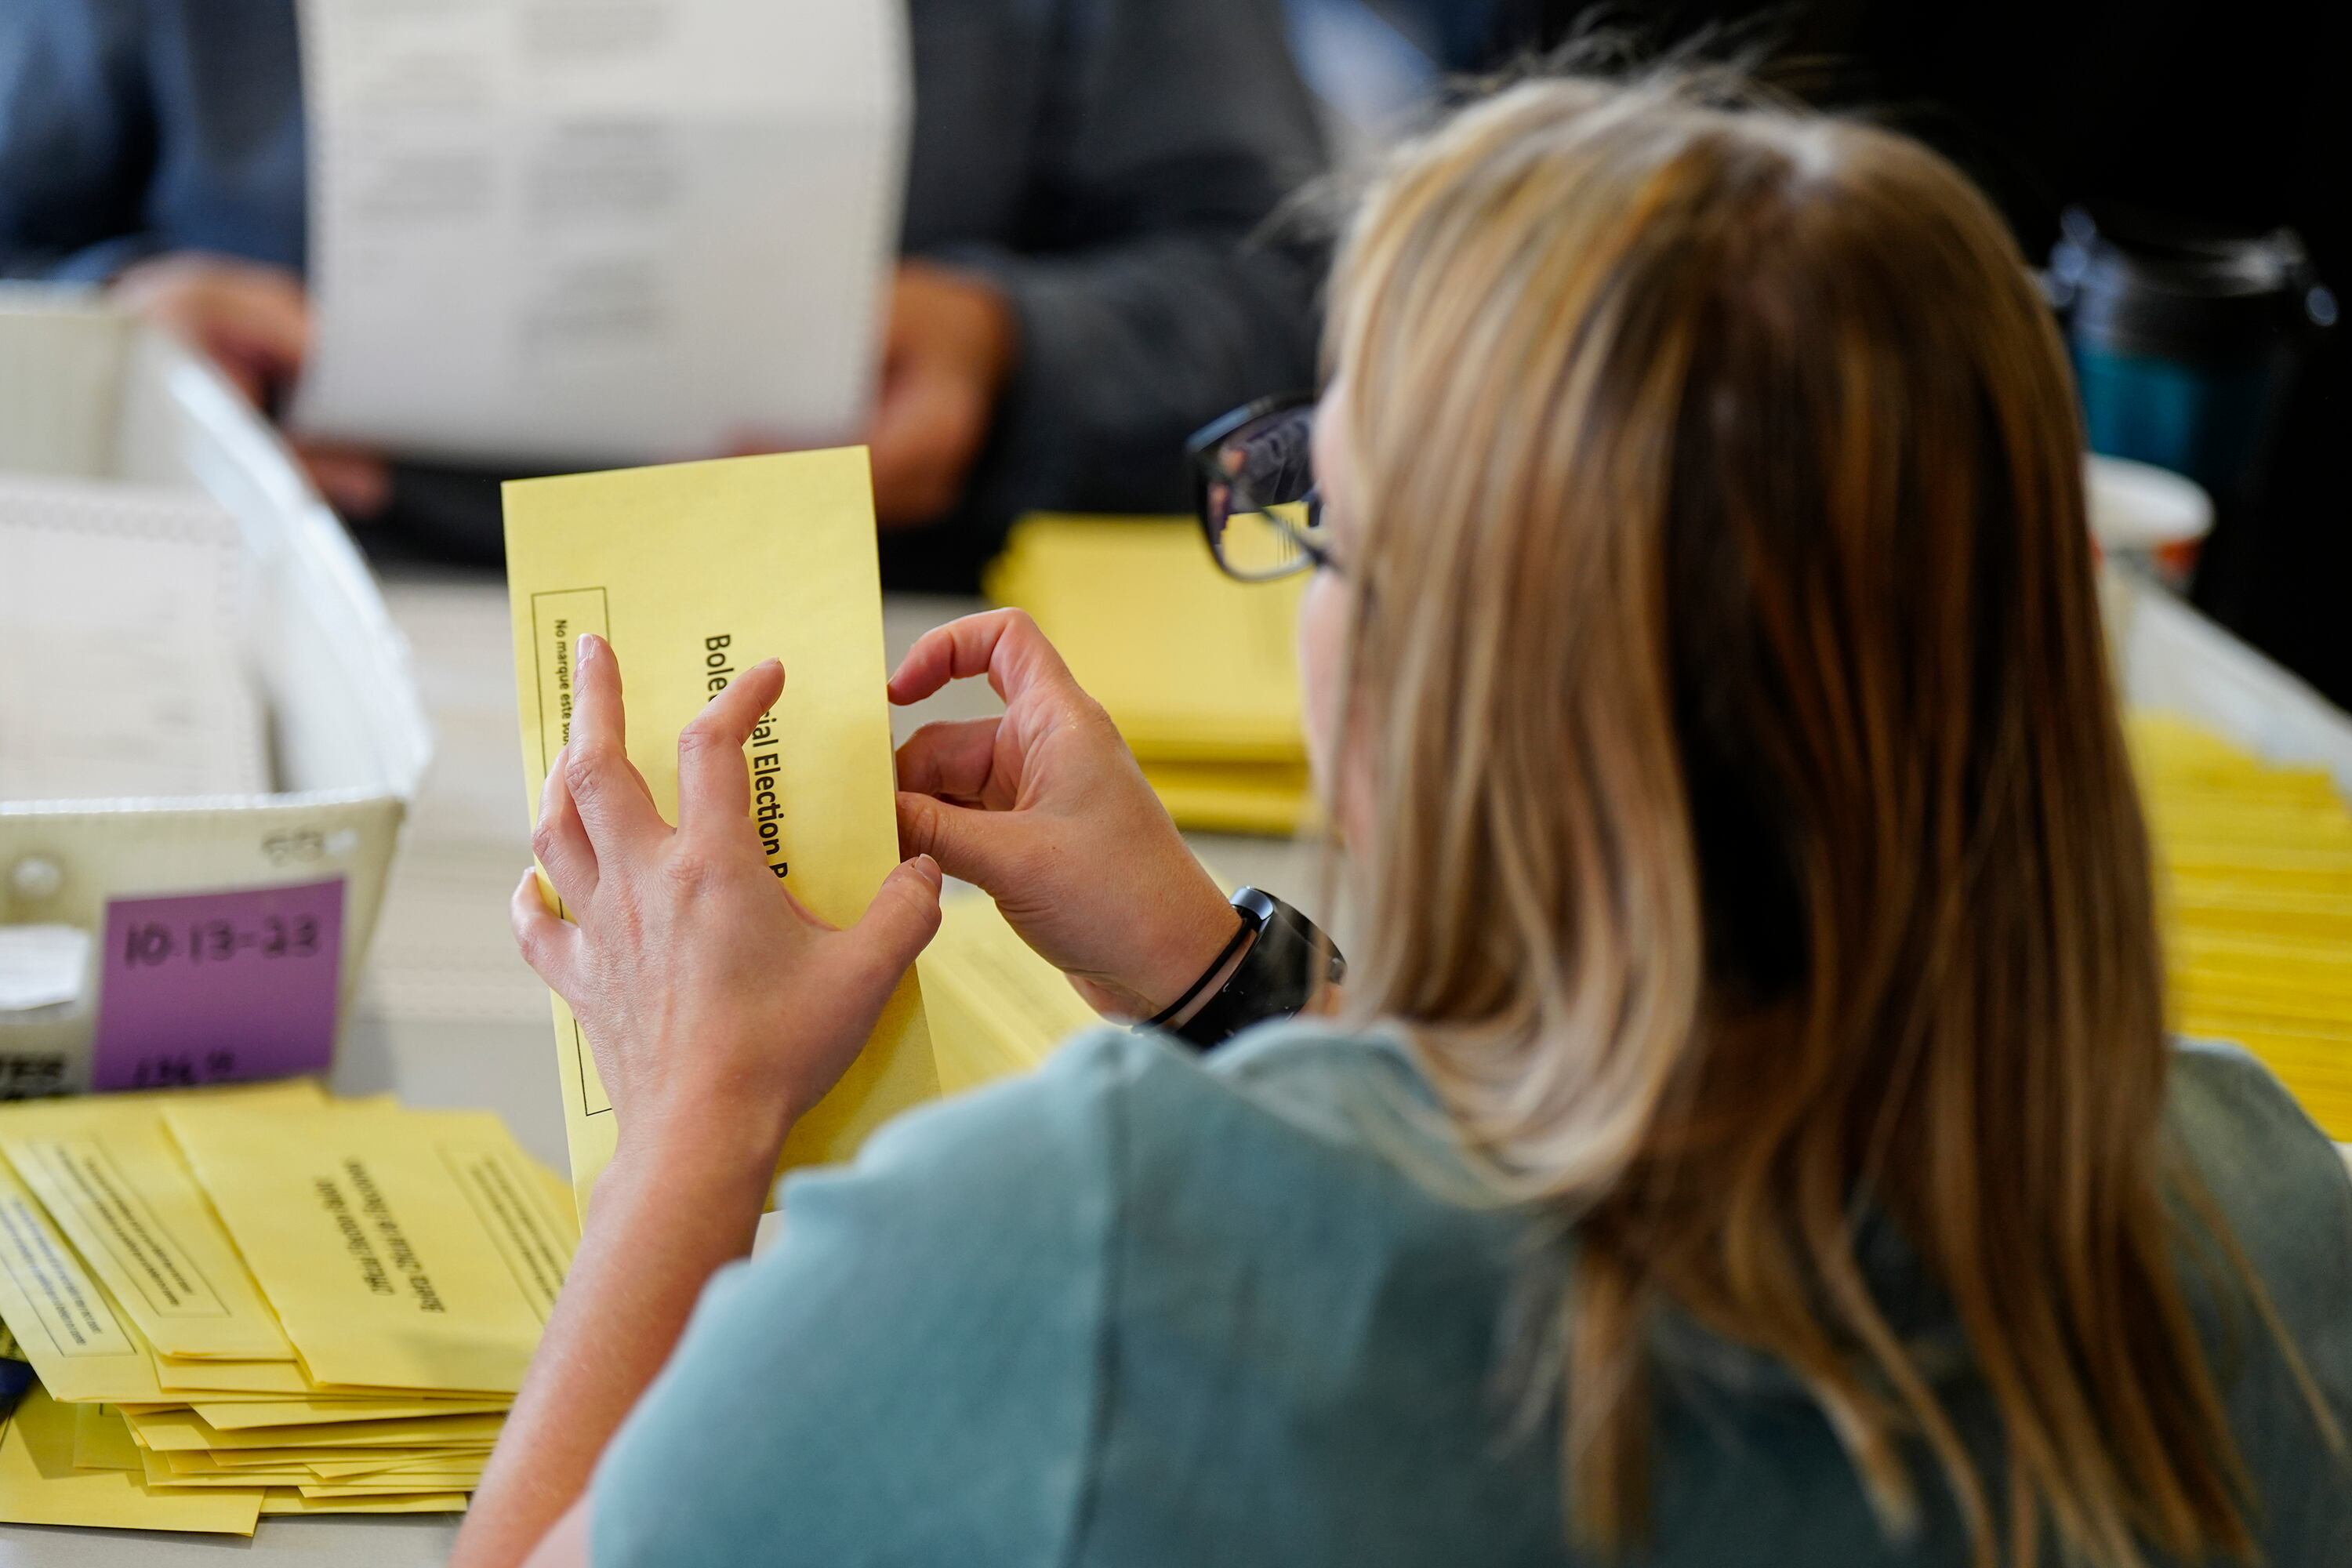 A person with long blonde hair and wearing a blue shirt holds a yellow ballot envelope with stacks of yellow envelopes on the table in the background.